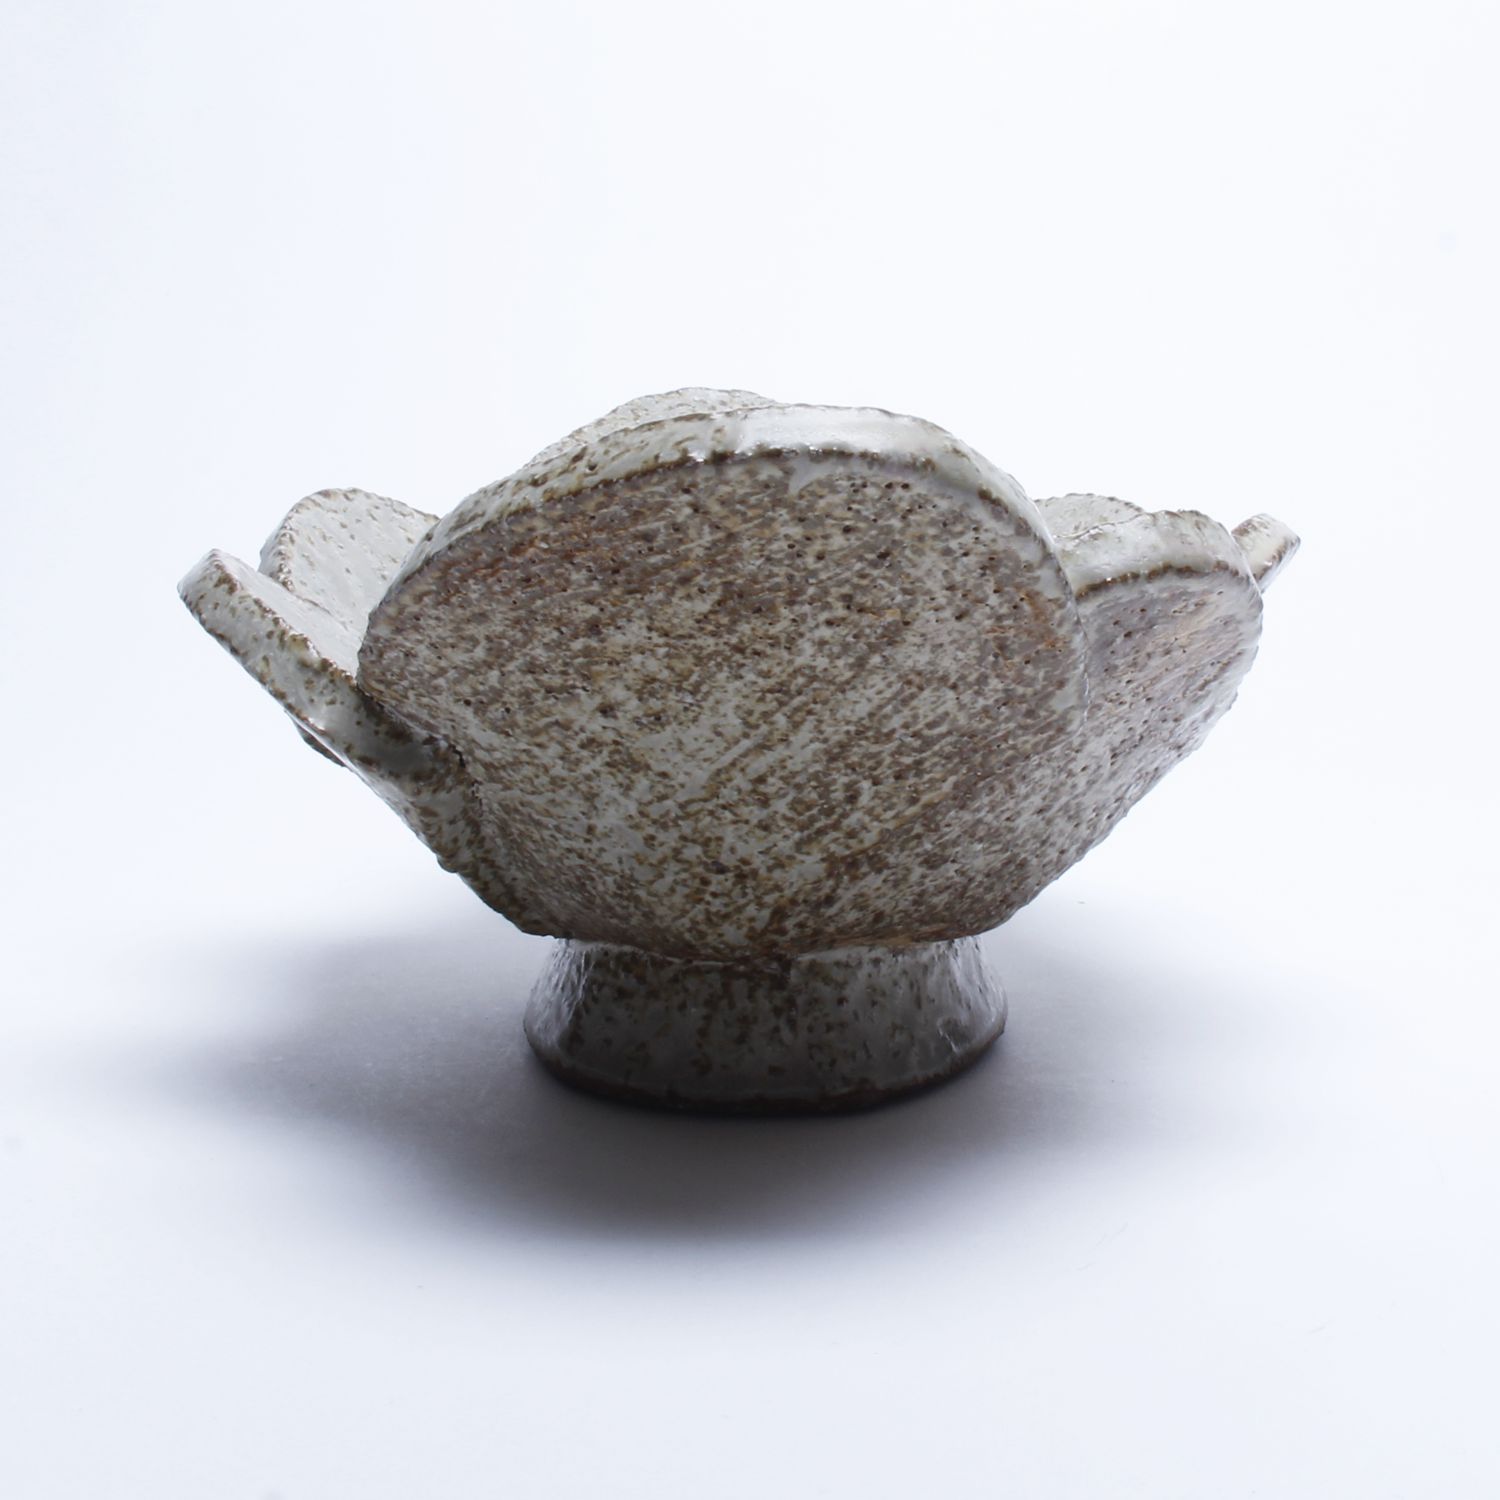 Bruce Cochrane: Overlapping Tan Oval Bowl Product Image 4 of 5